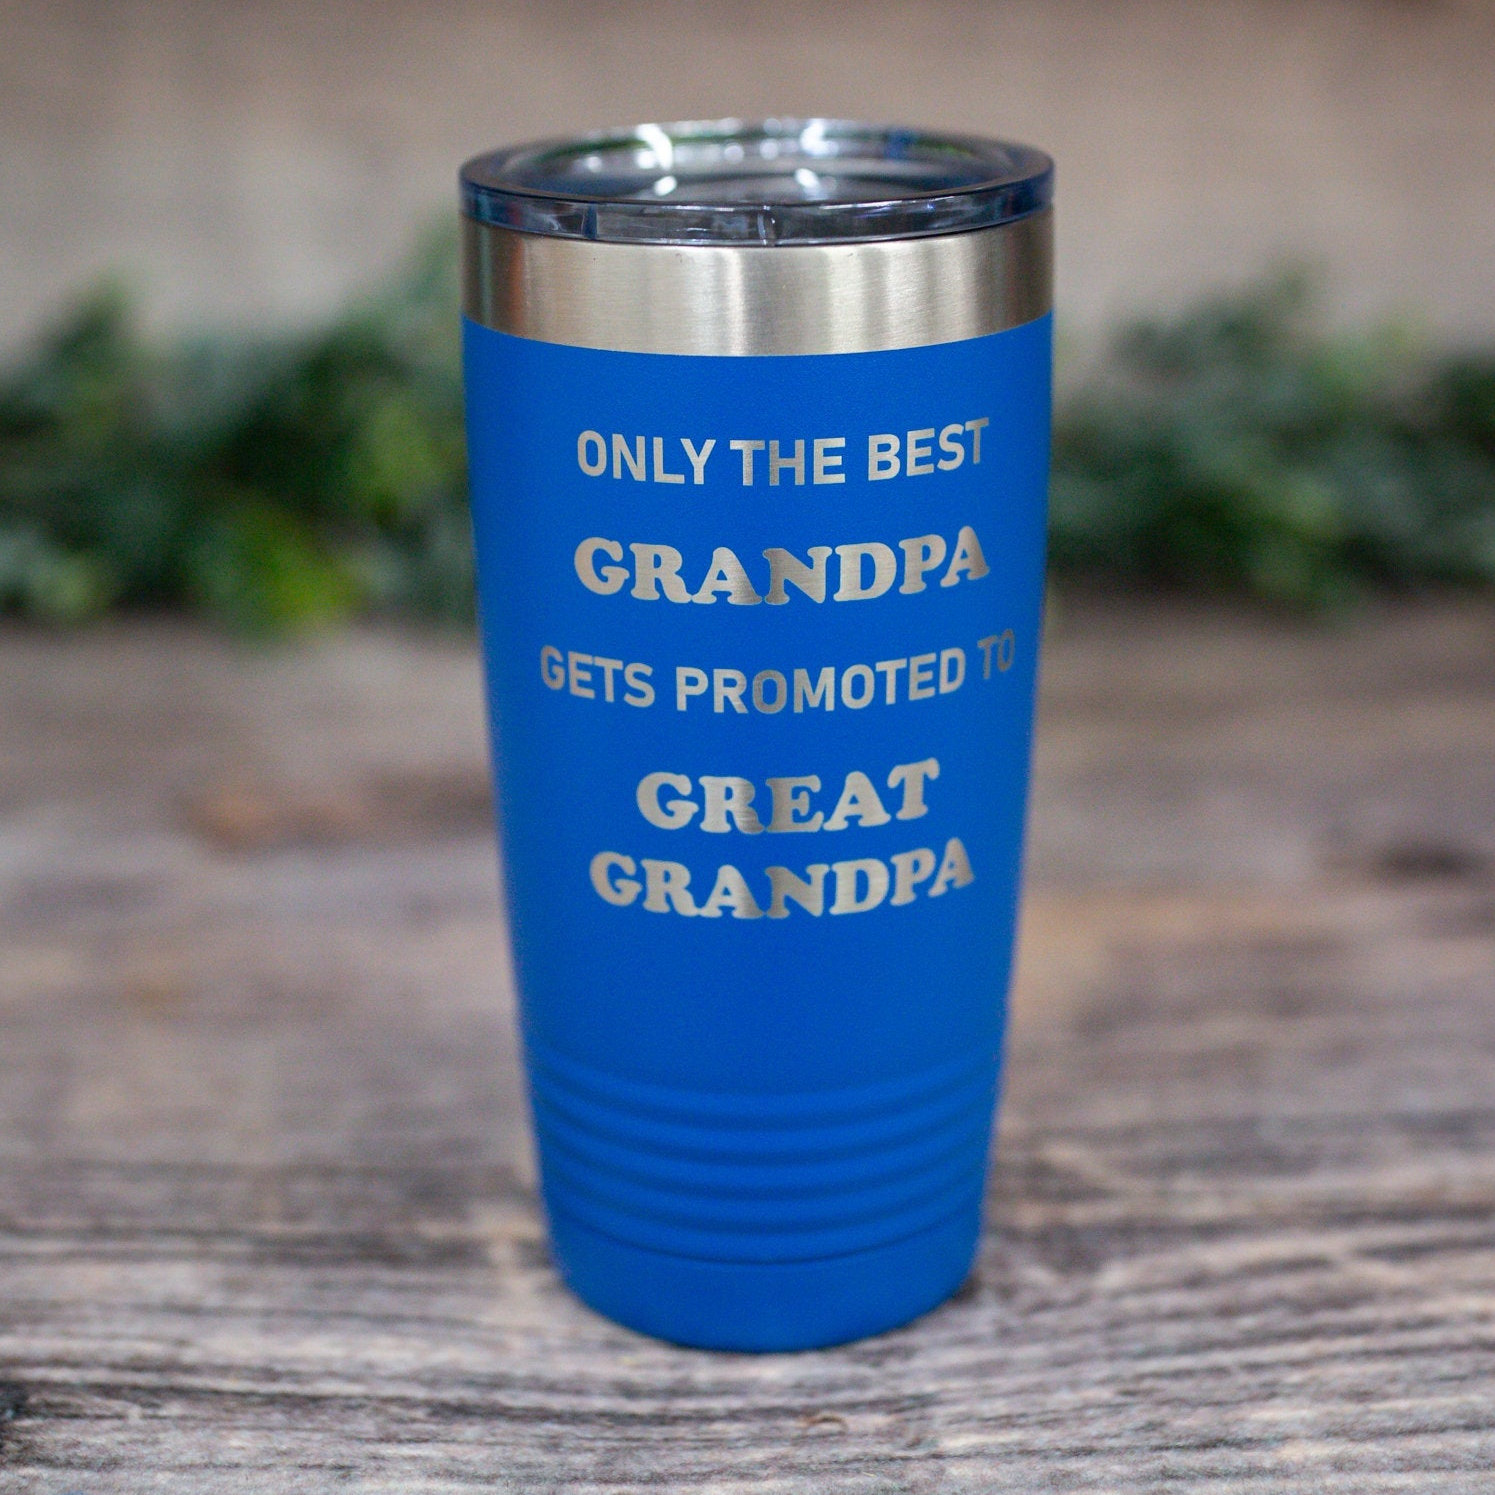 https://3cetching.com/wp-content/uploads/2021/07/only-the-best-grandpa-gets-promoted-to-great-grandpa-engraved-stainless-steel-tumbler-great-grandpa-mug-gift-for-him-60f72976.jpg